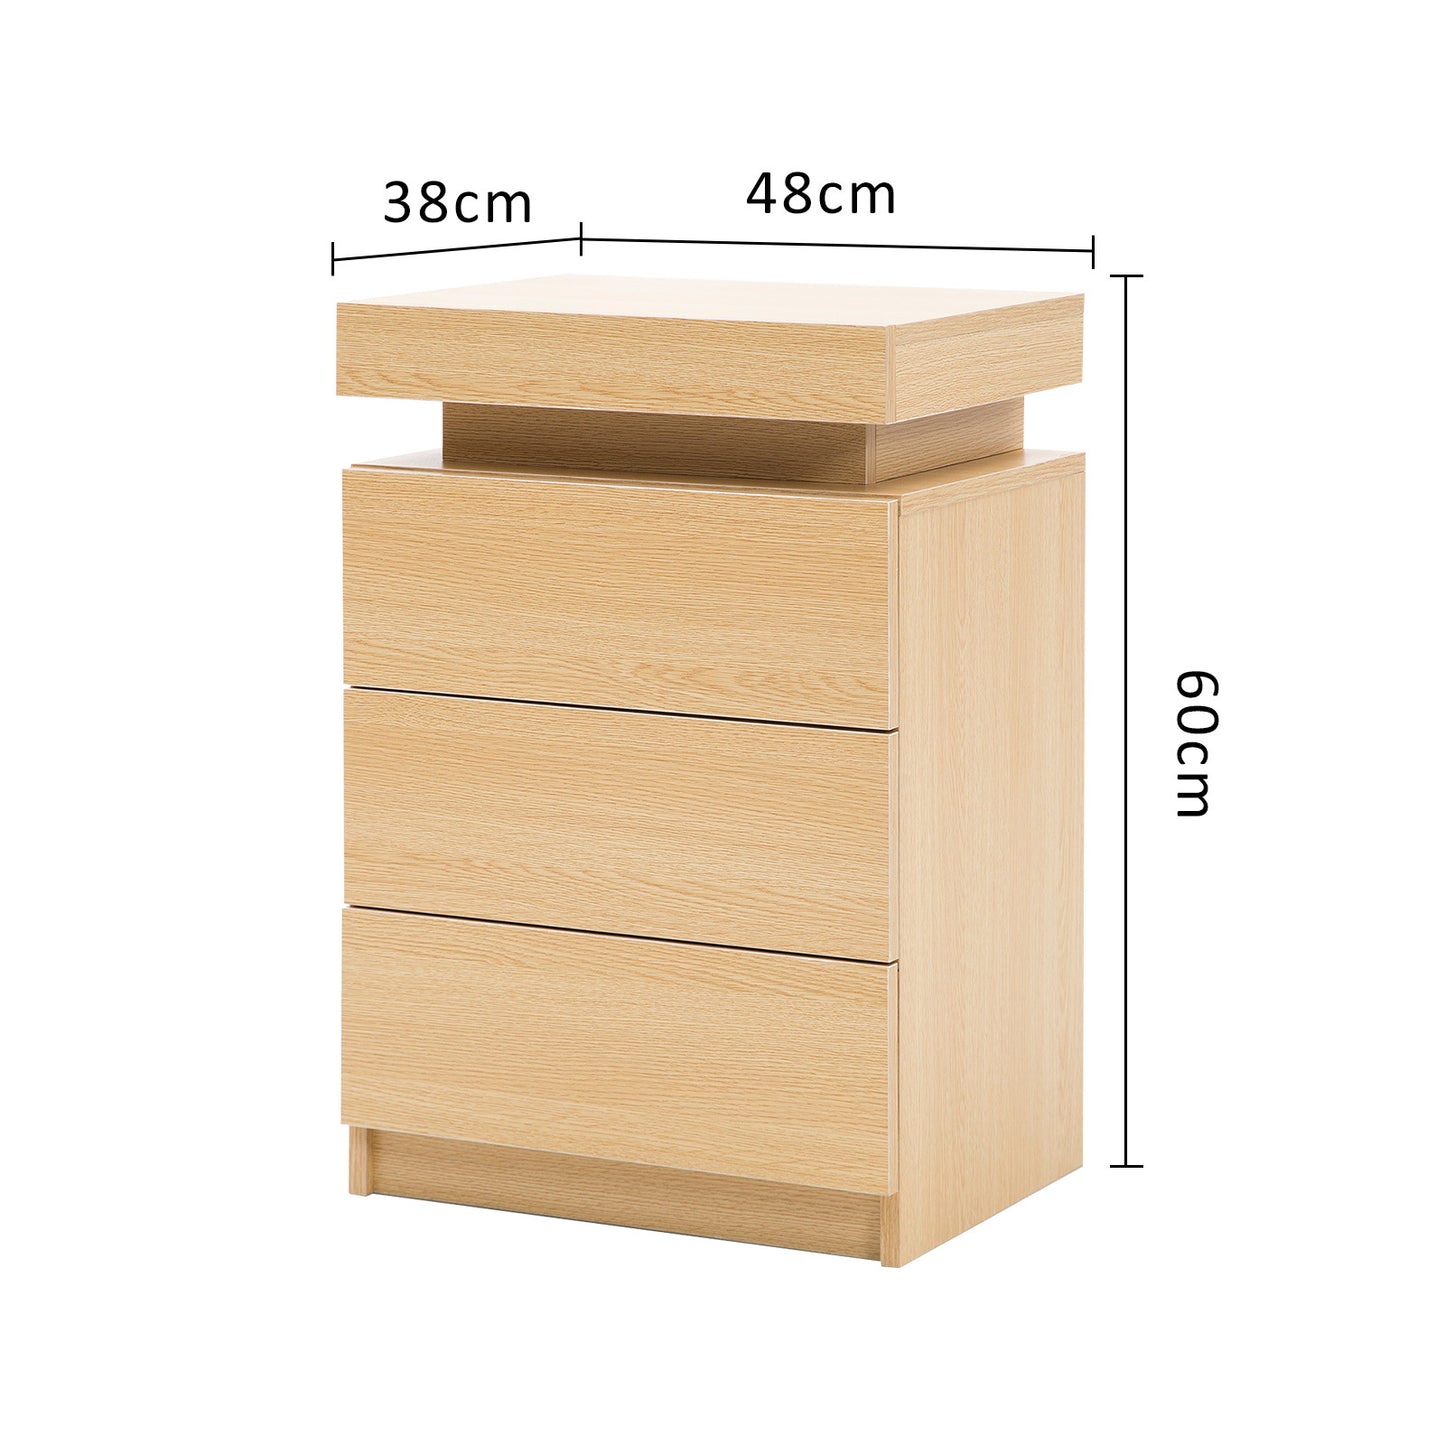 2X Bedside Table 3 Drawers RGB LED Bedroom Cabinet Nightstand Gloss GLORY OAK